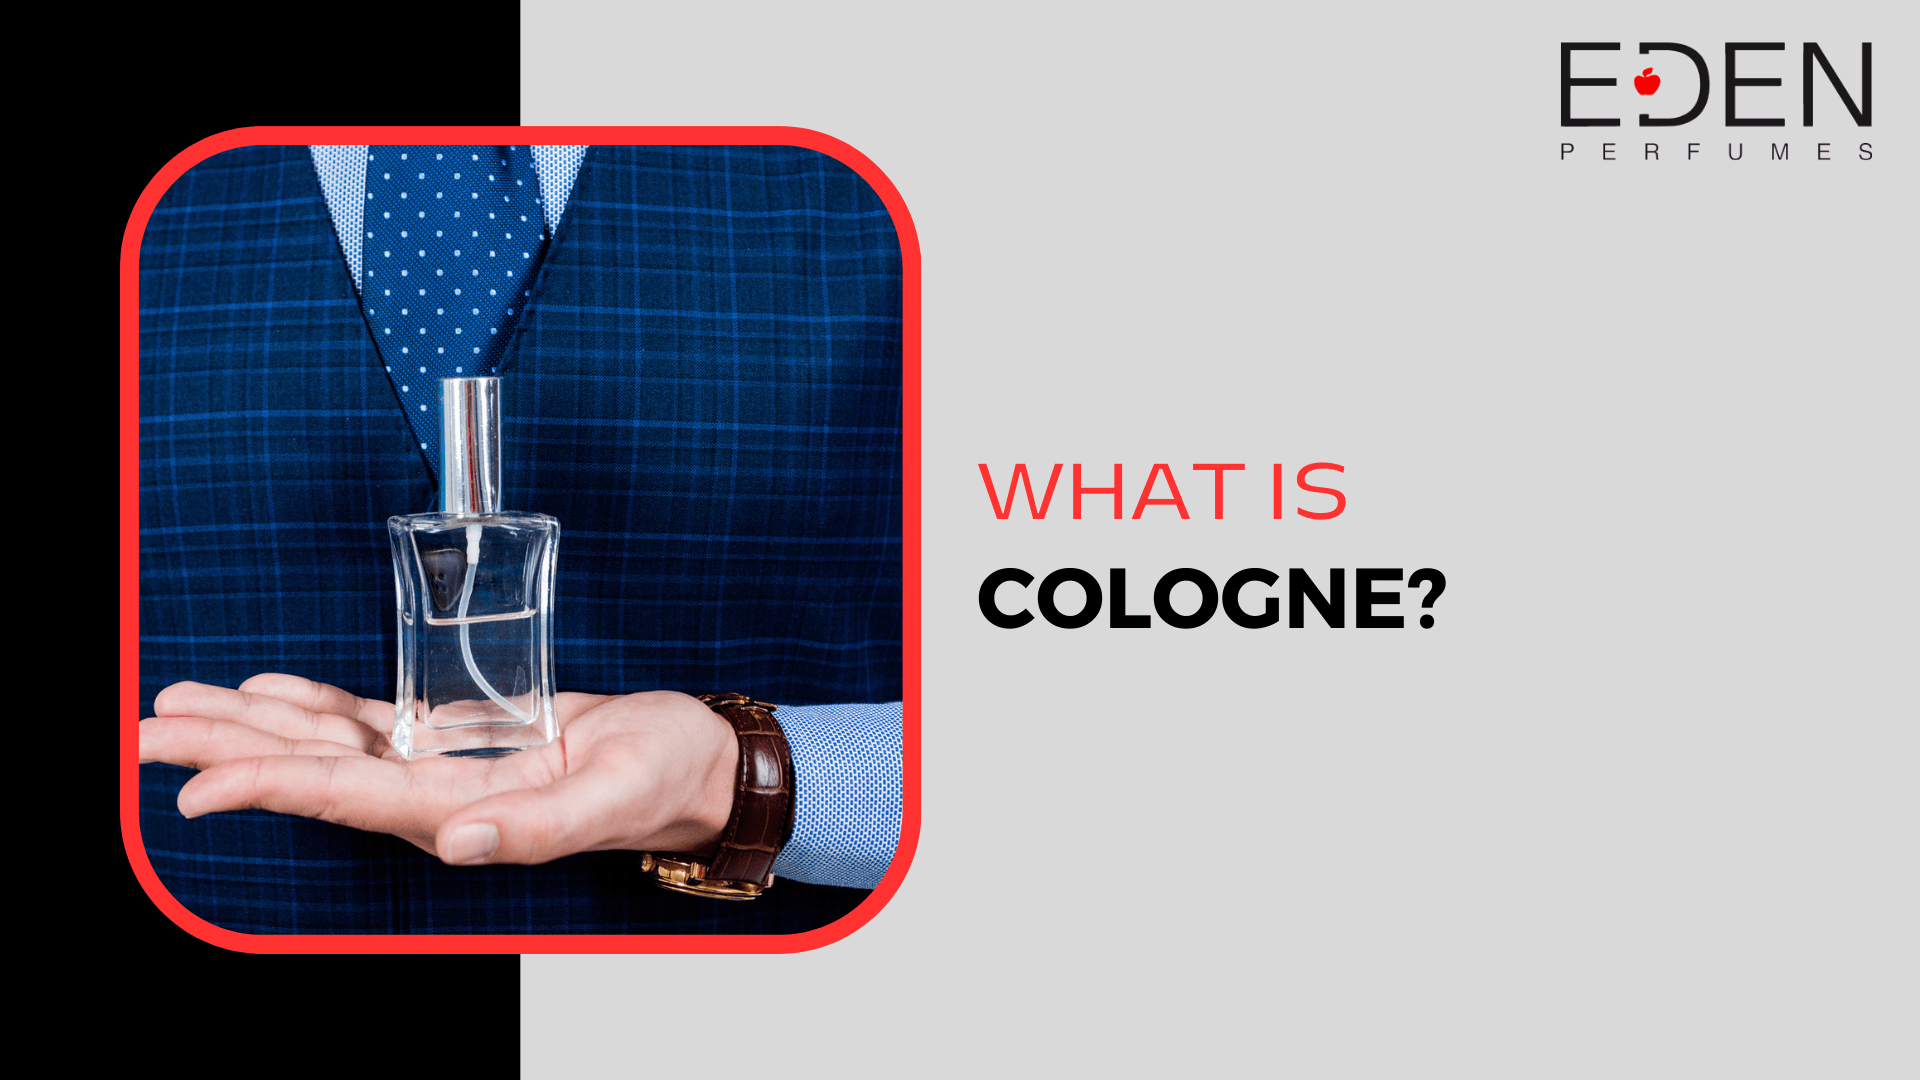 What is cologne?